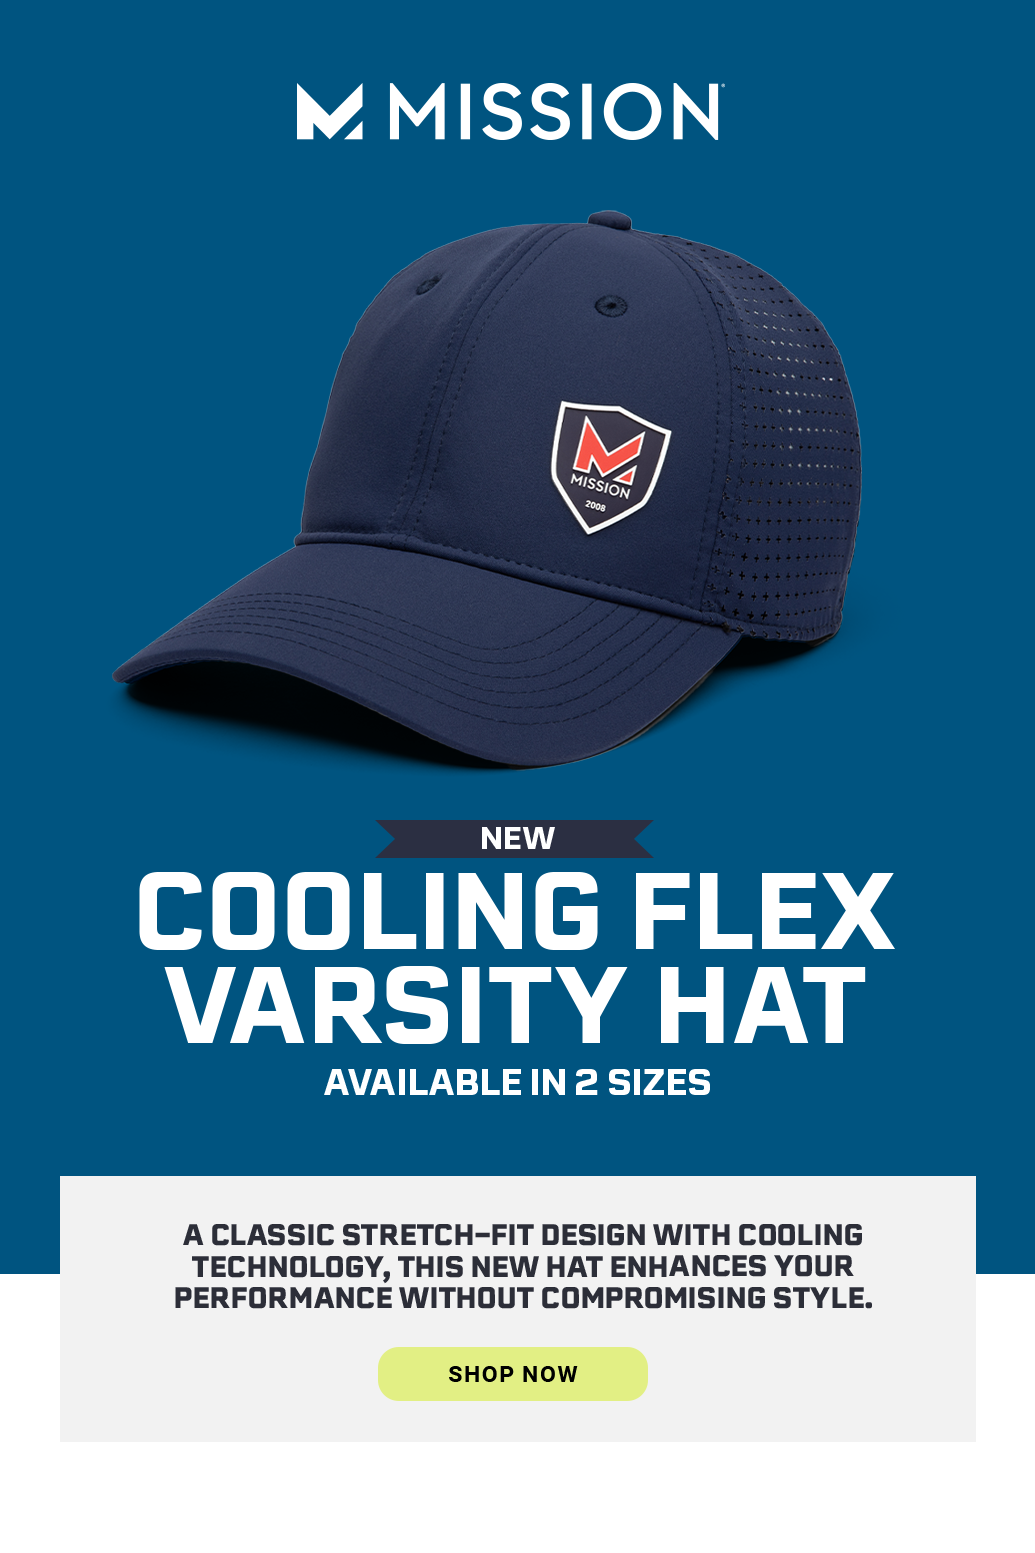 NEW Cooling Flex Varsity Hat Available in 2 sizes A classic stretch-fit design with cooling technology, this new hat enhances your performance without compromising style. >>> SHOP NOW [different angles of hat with call-outs] [angle 1]: Elasticized Stretch Fit [angle 2]: Ventilation for Airflow [angle 3]: UPF 50 Sun Protection [SHOP NOW]